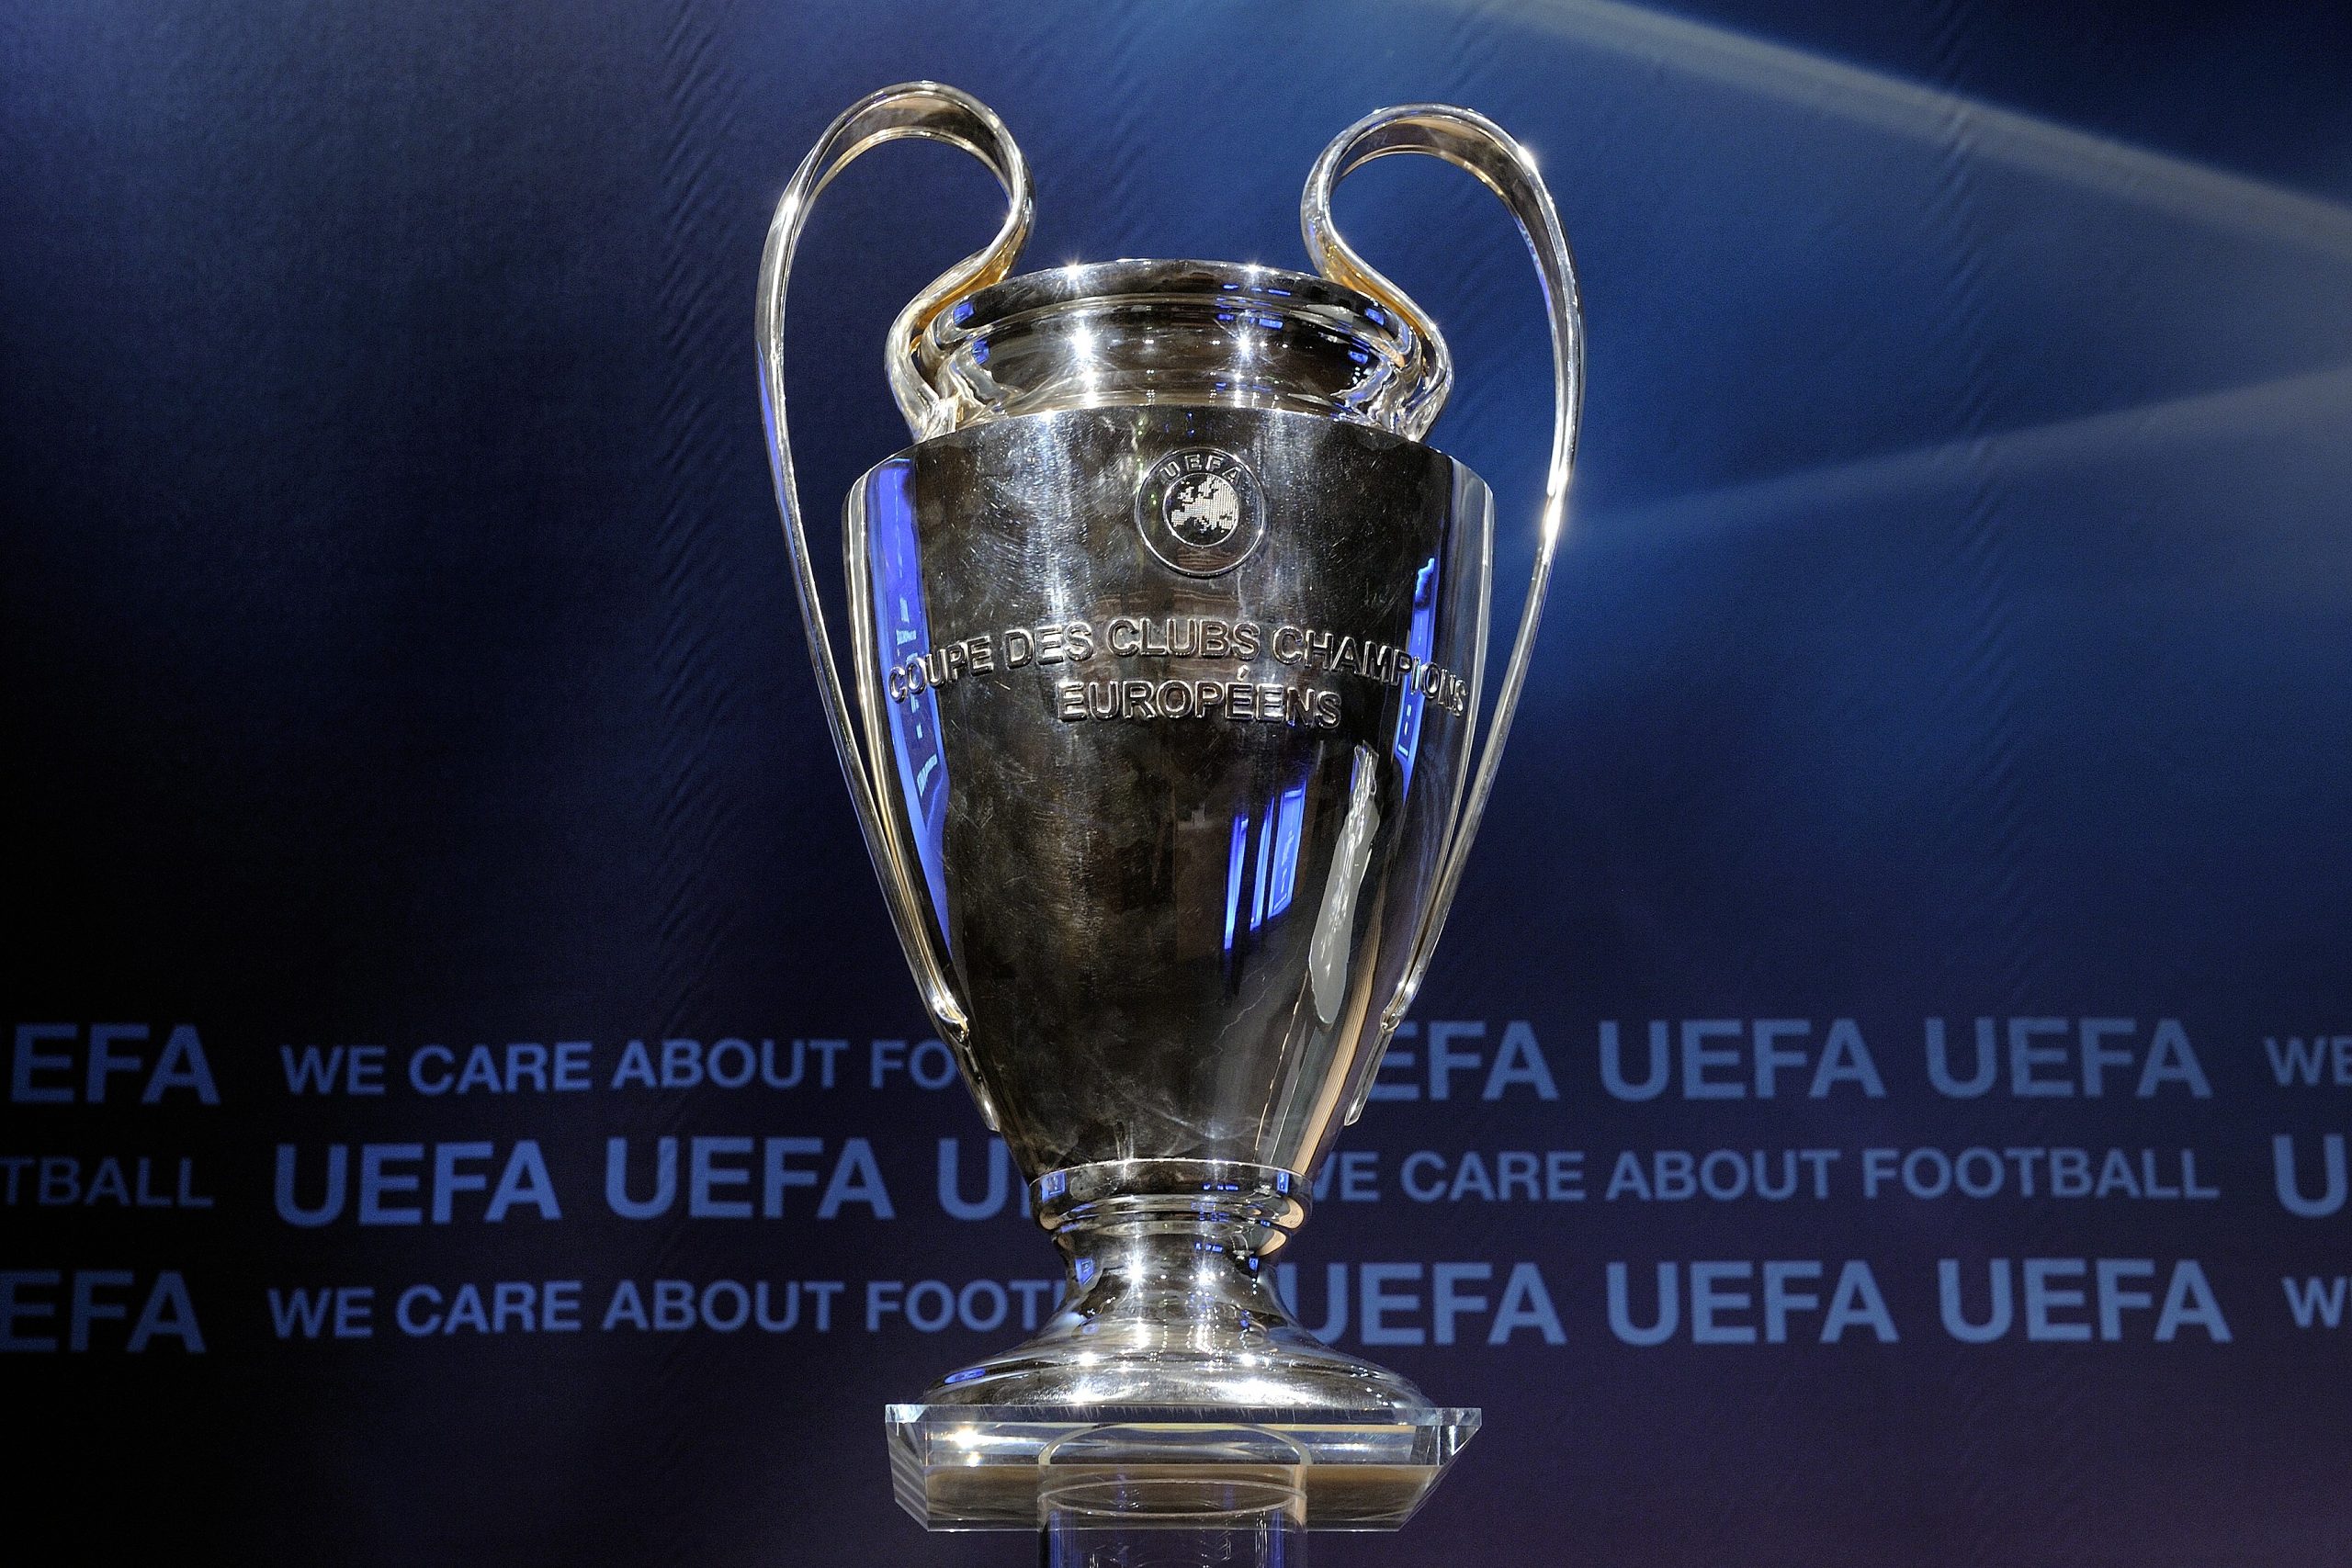 2021/22 UEFA Champions League Starts in Mid-September